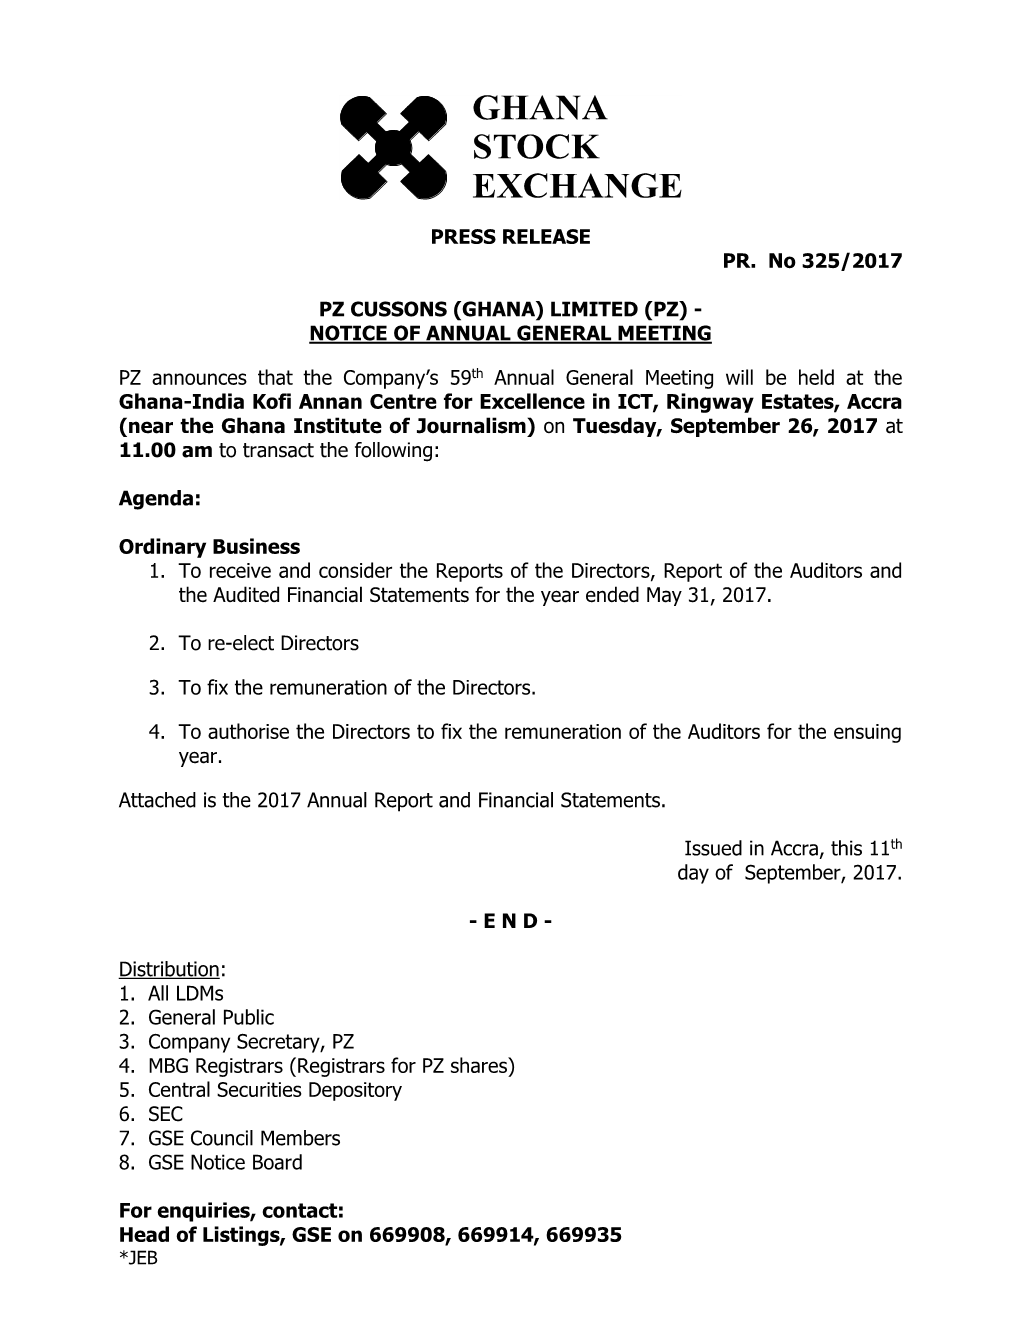 Pz Cussons (Ghana) Limited (Pz) - Notice of Annual General Meeting